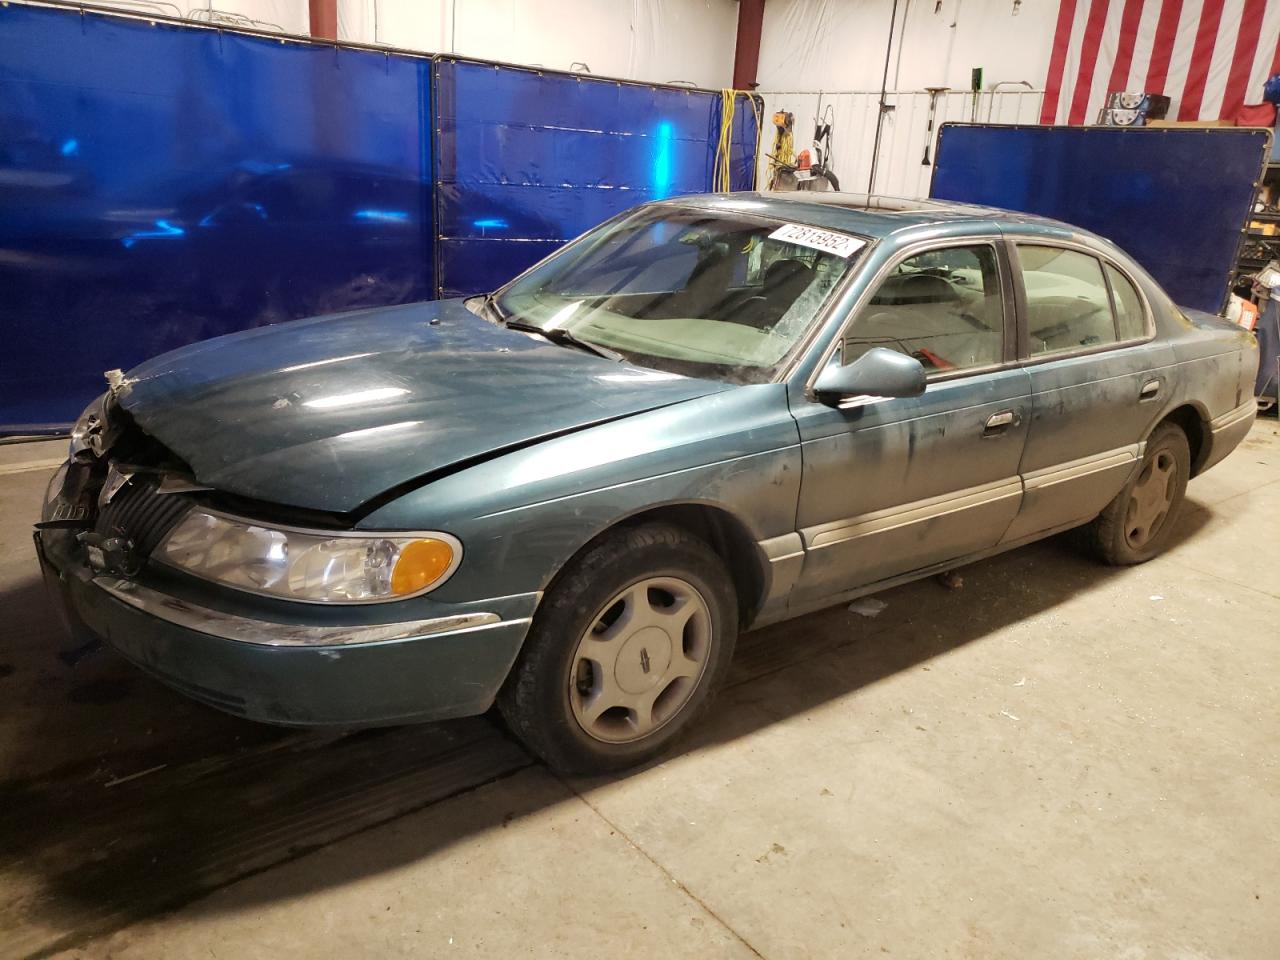 2001 Lincoln Continental for sale at Copart Billings, MT Lot #72815*** |  SalvageReseller.com